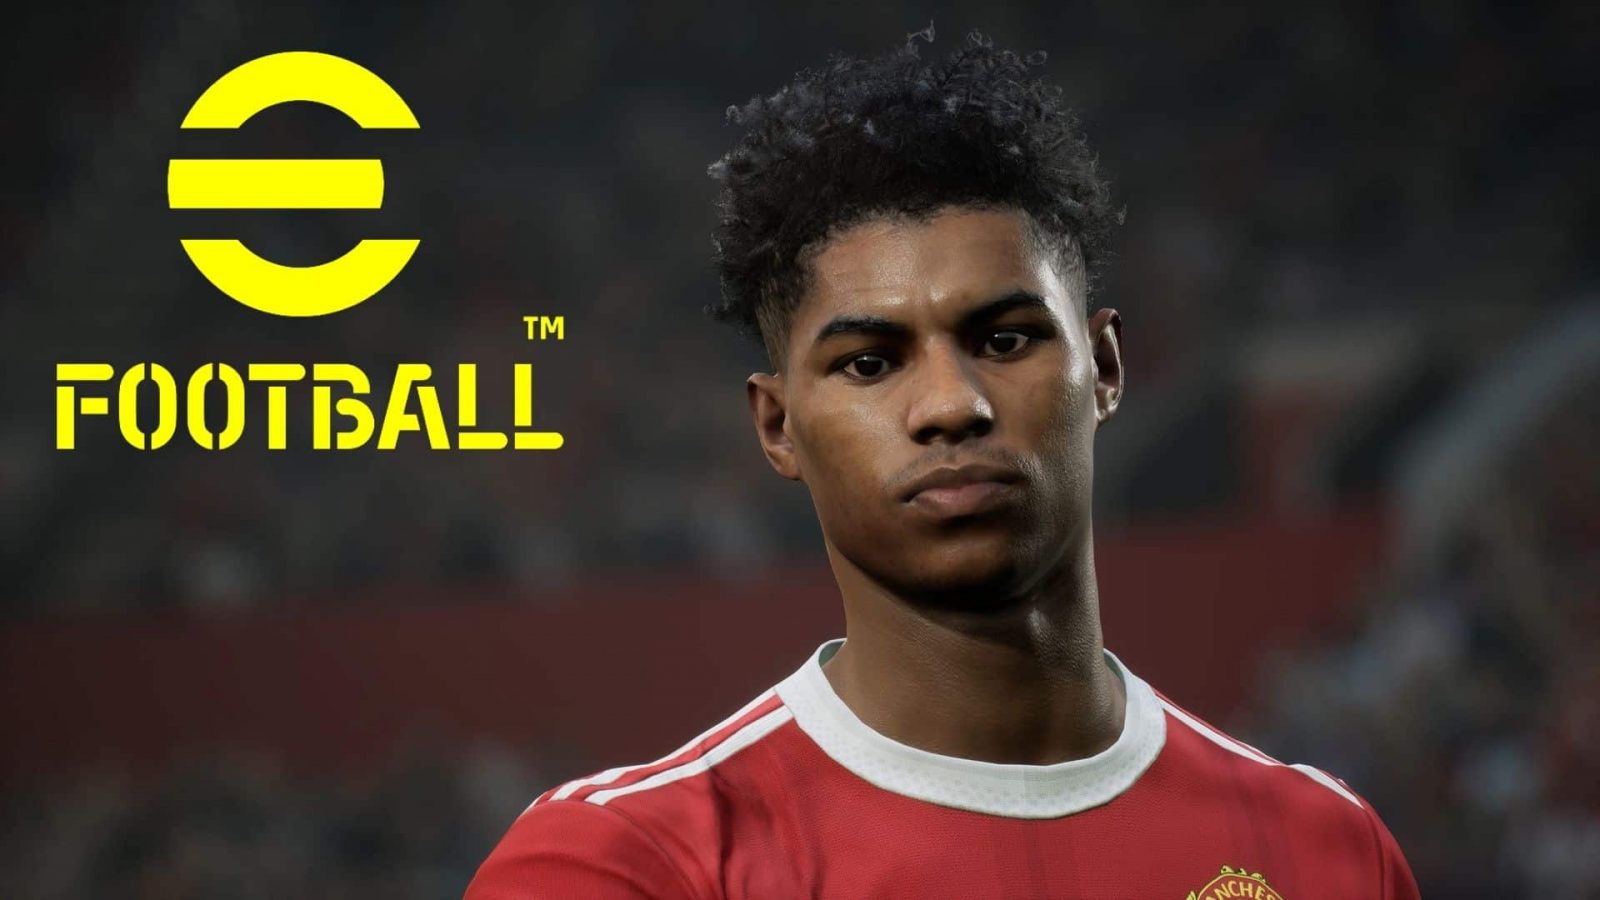 Patch Notes  eFootball™ Official Site